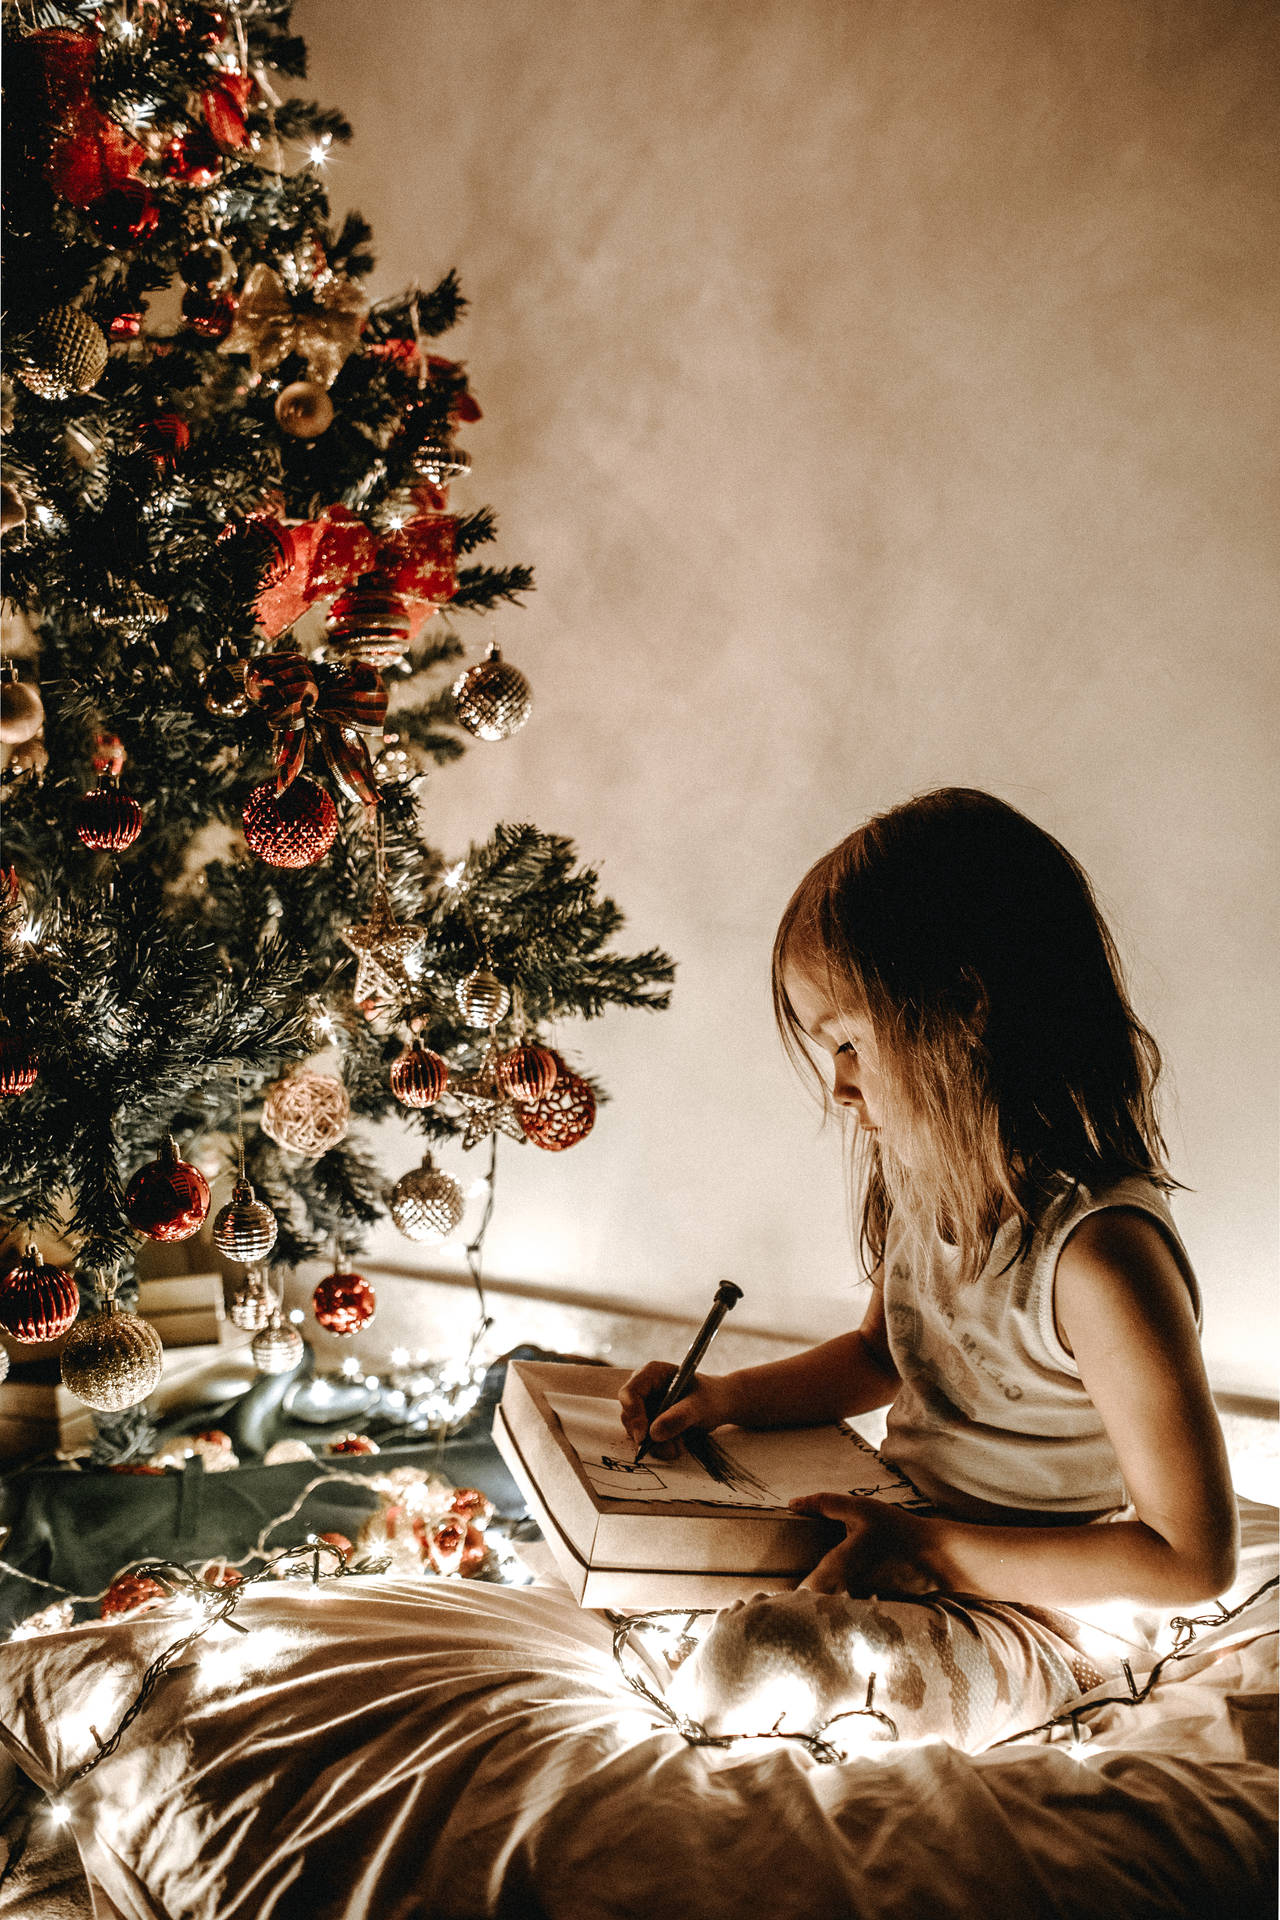 Girl writing on her present by a Christmas tree wallpaper.